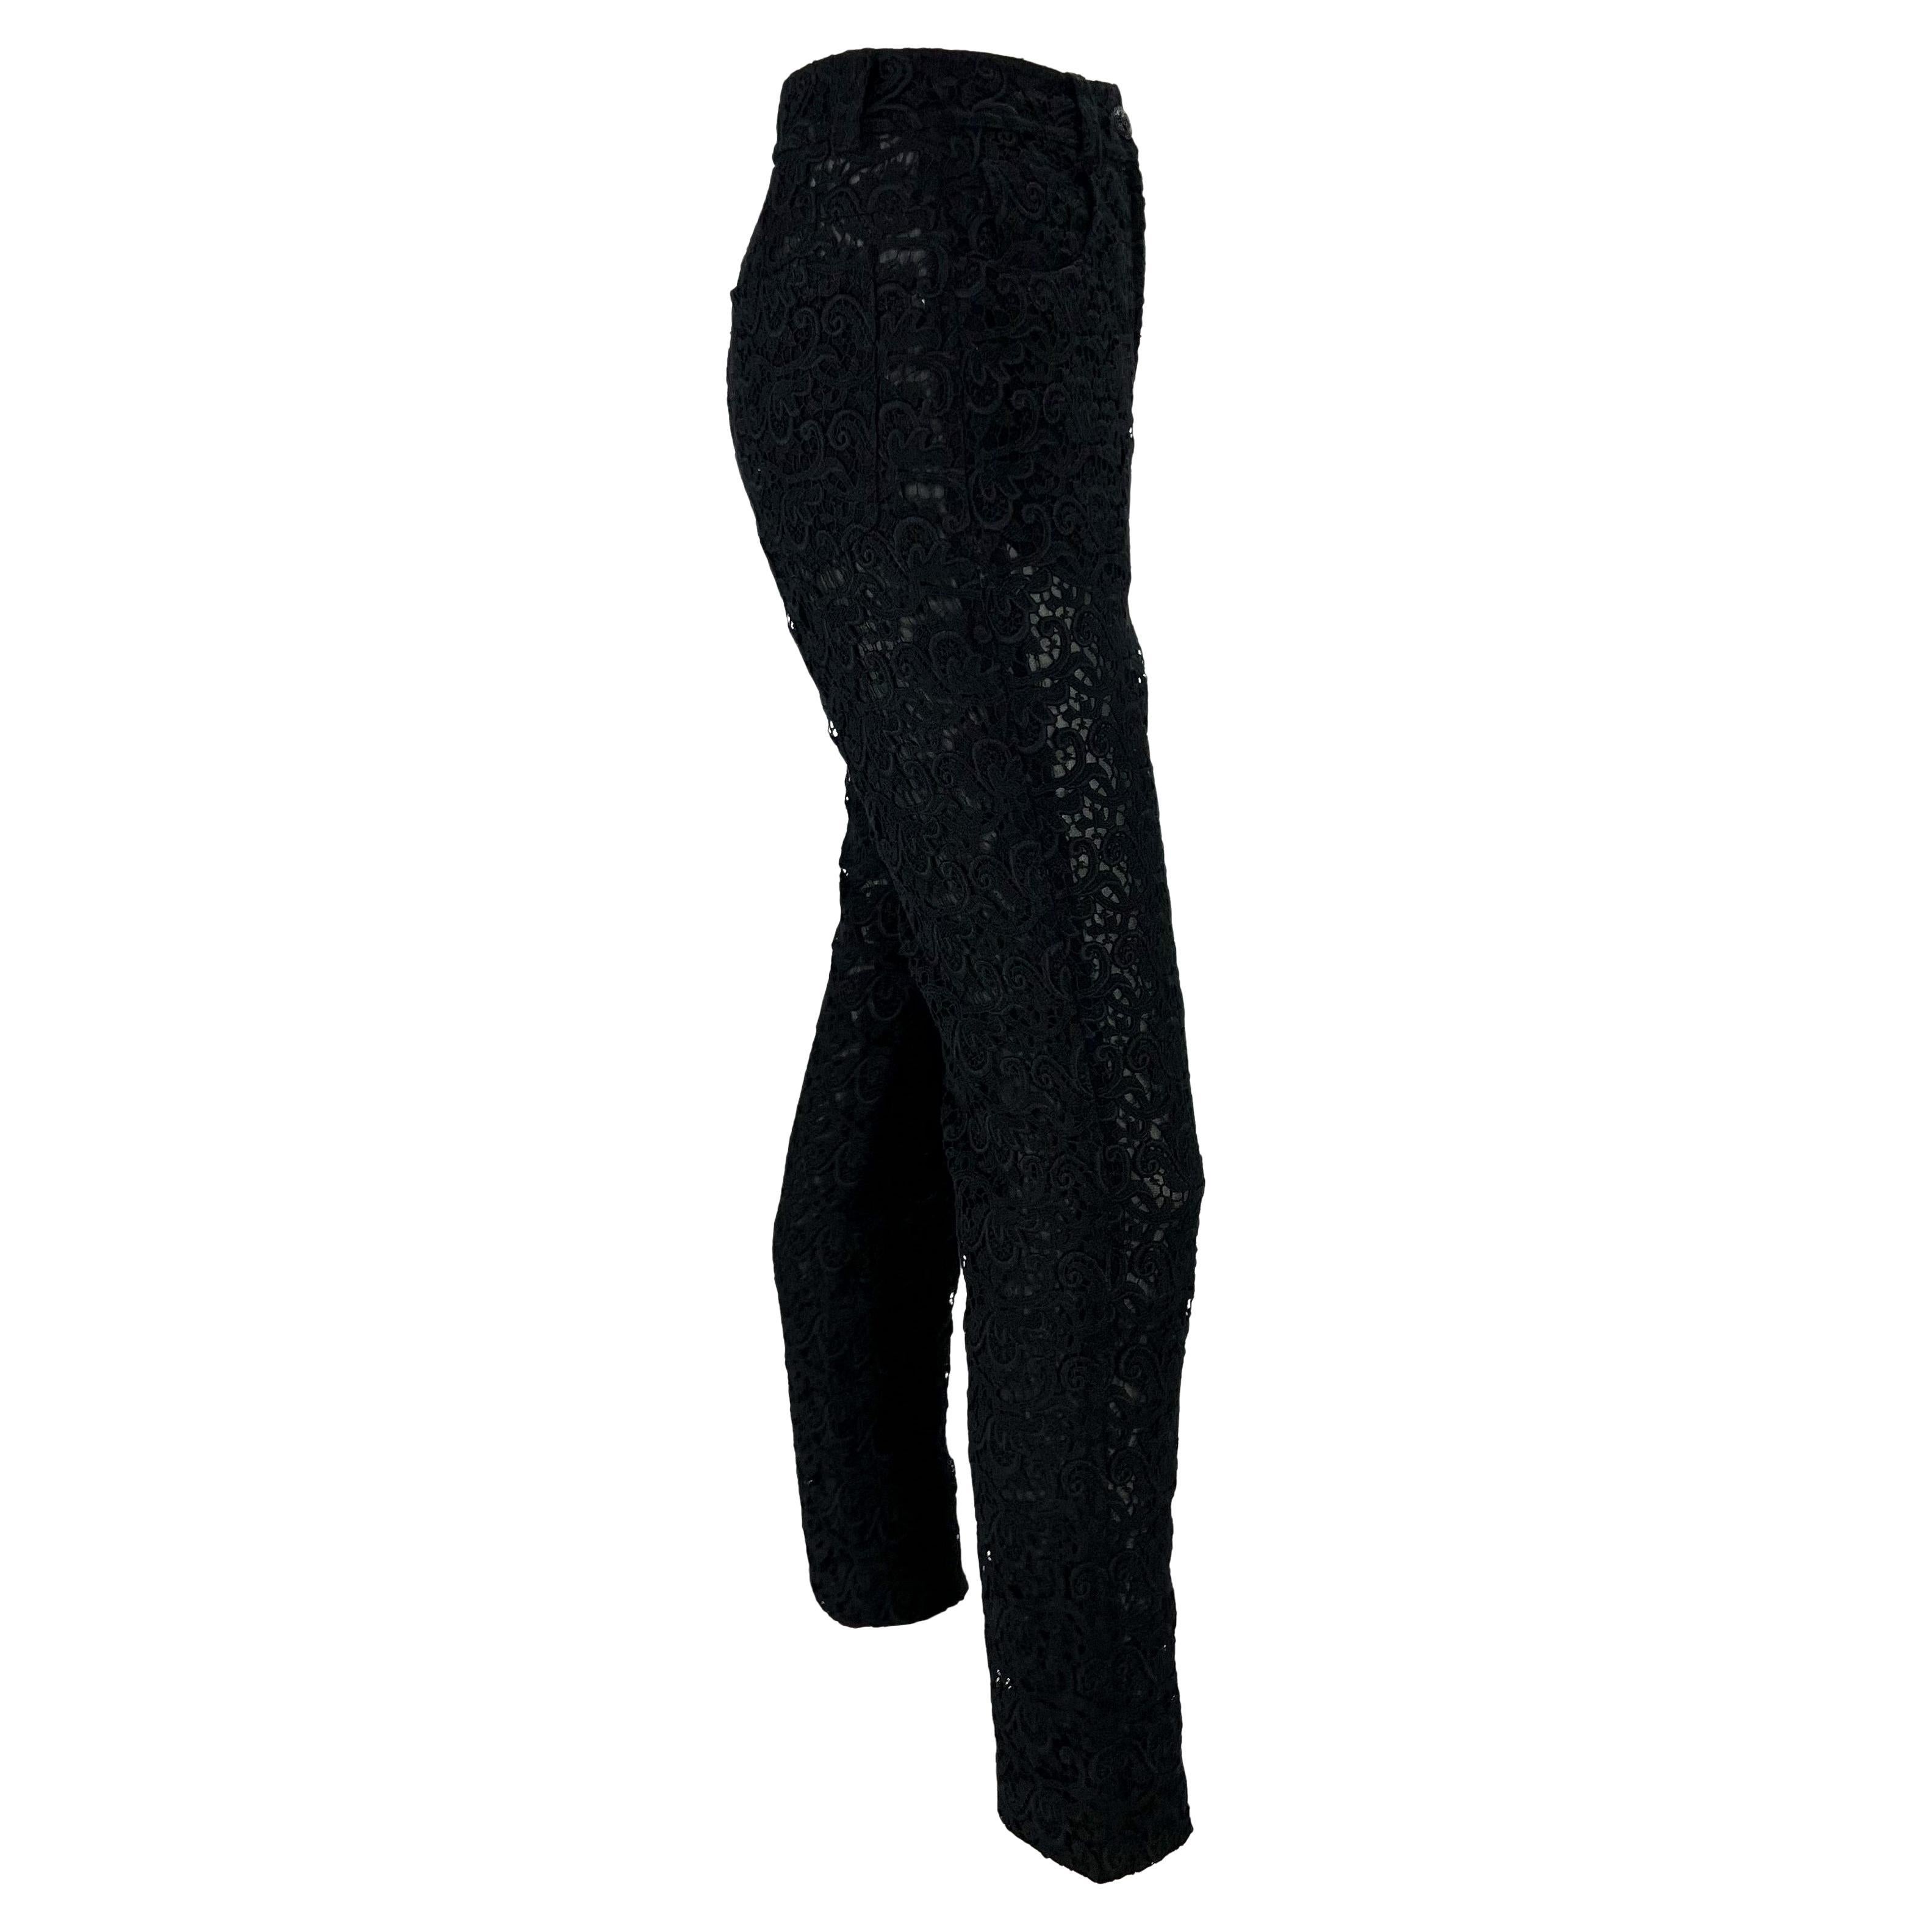 Women's S/S 1994 Gianni Versace Sheer Black Lace Jeans Pants For Sale